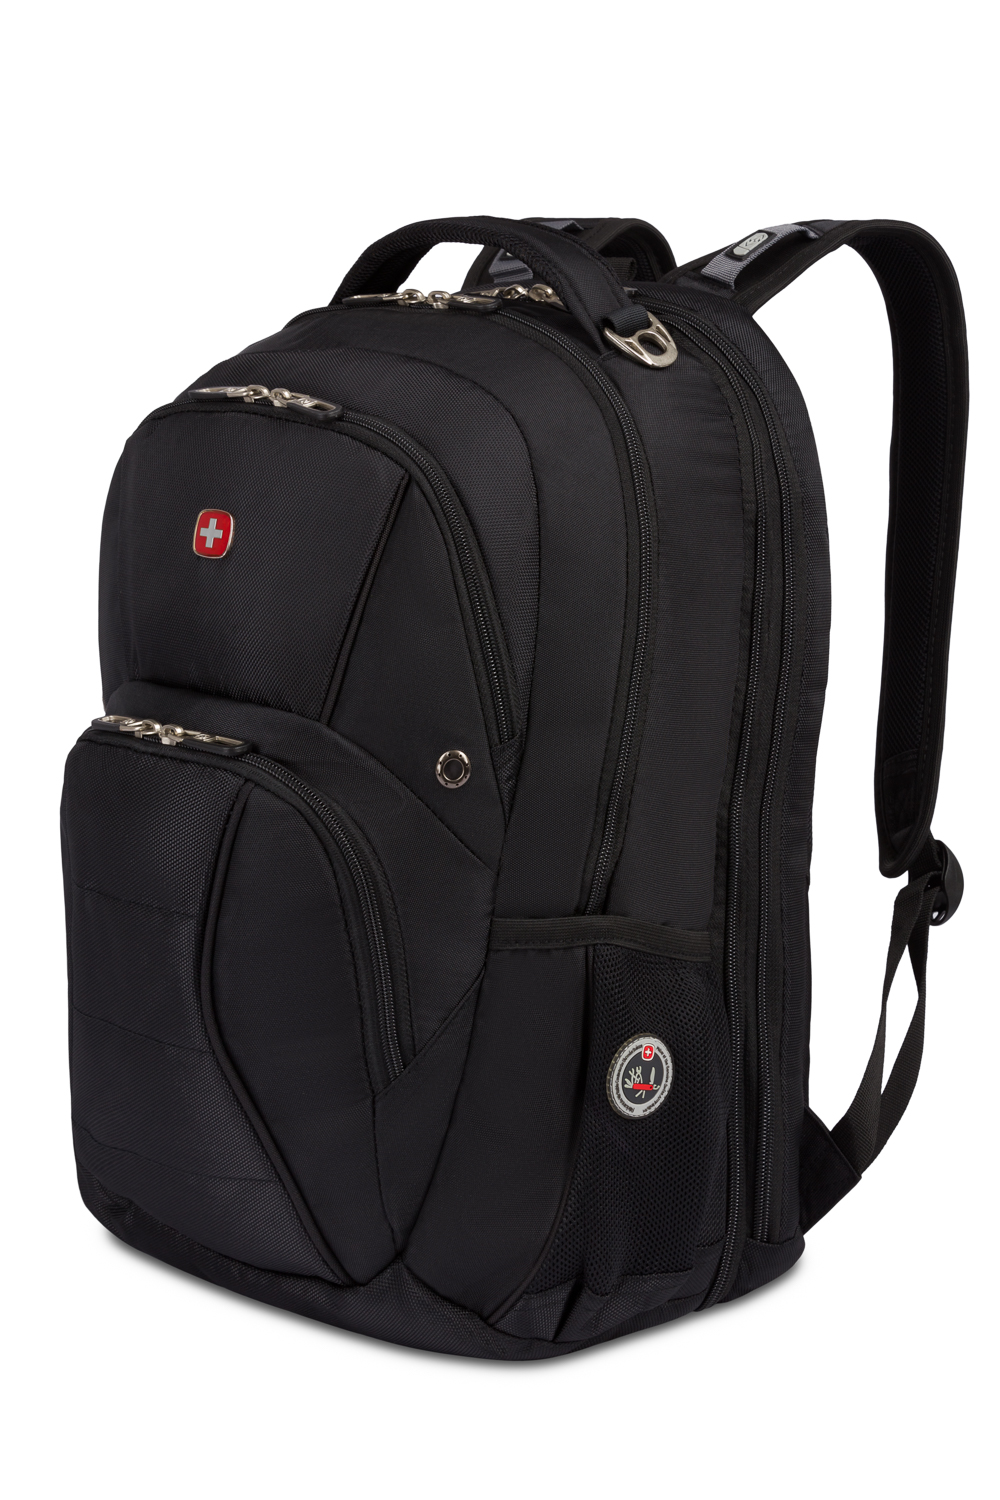 Fits Most 17 Inch Laptops and Tablets Swiss Gear SA1908 Black TSA Friendly ScanSmart Laptop Backpack 